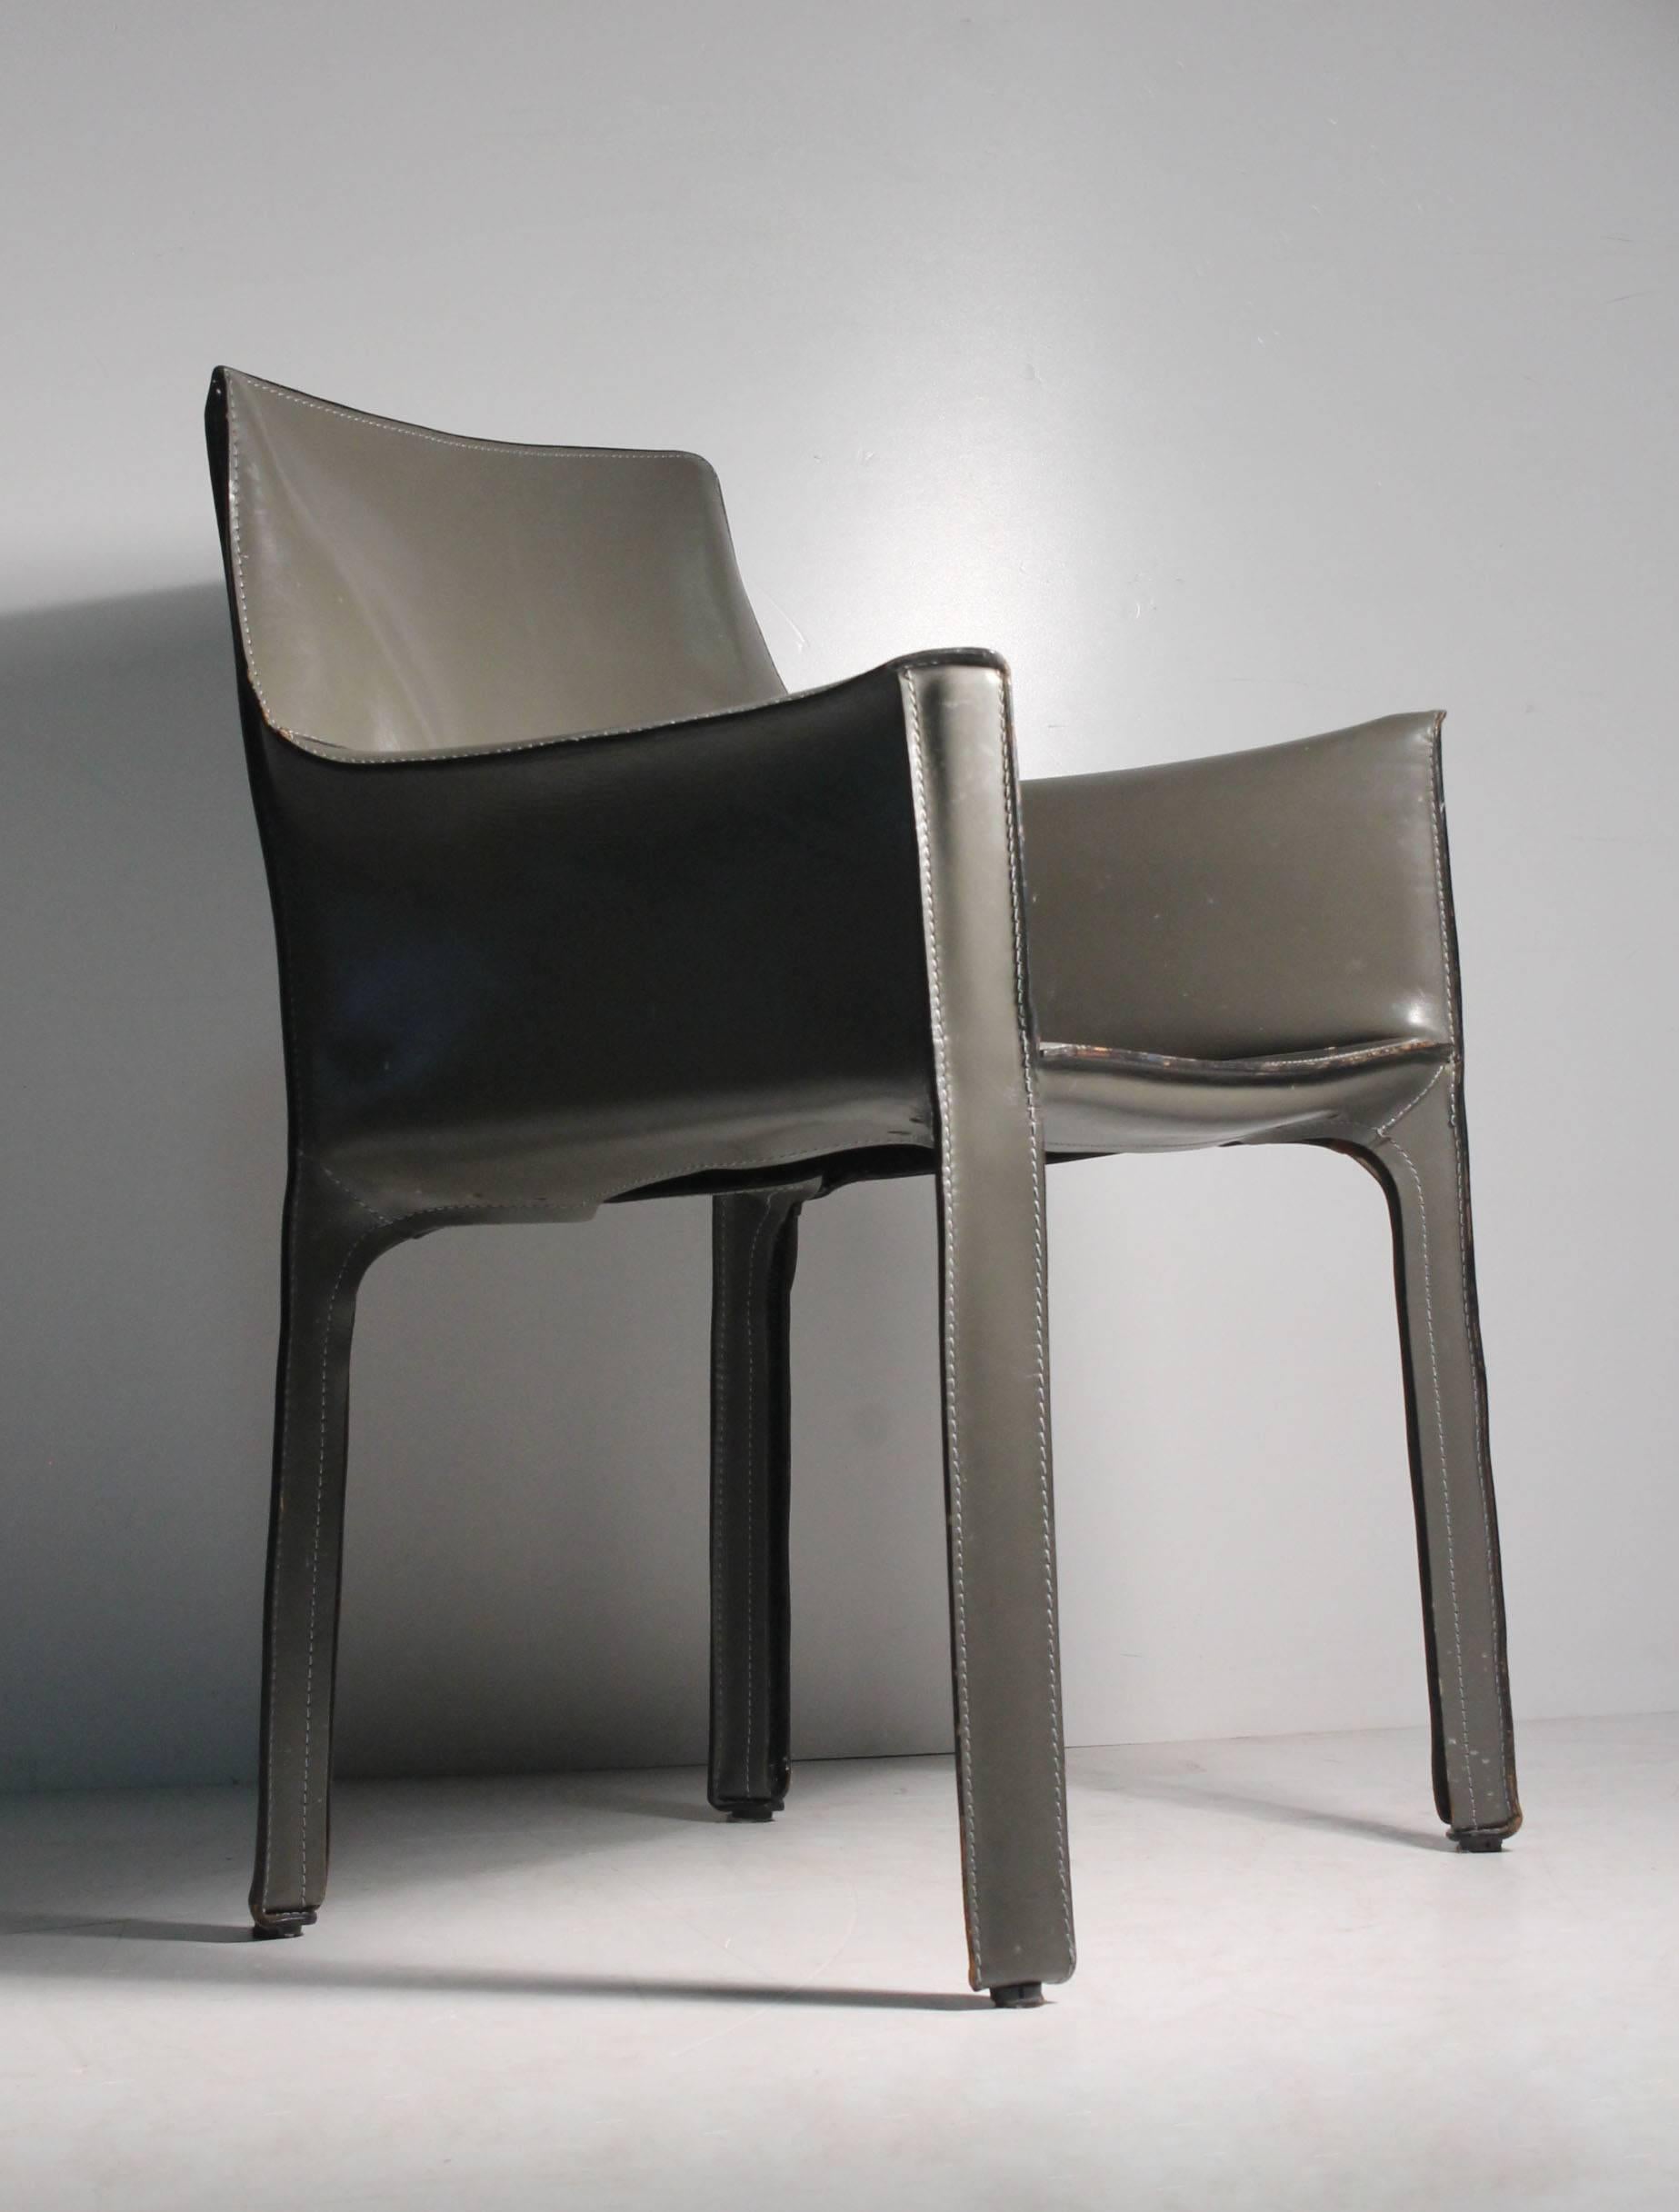 Mario Bellini cab chairs, set of six, Cassina Italy, leather over steel.
Not often found in this designer color warm grey.

Nice vintage condition. Leather overall looks pretty nice. Please request detail photos.

The bottom plastic shells are